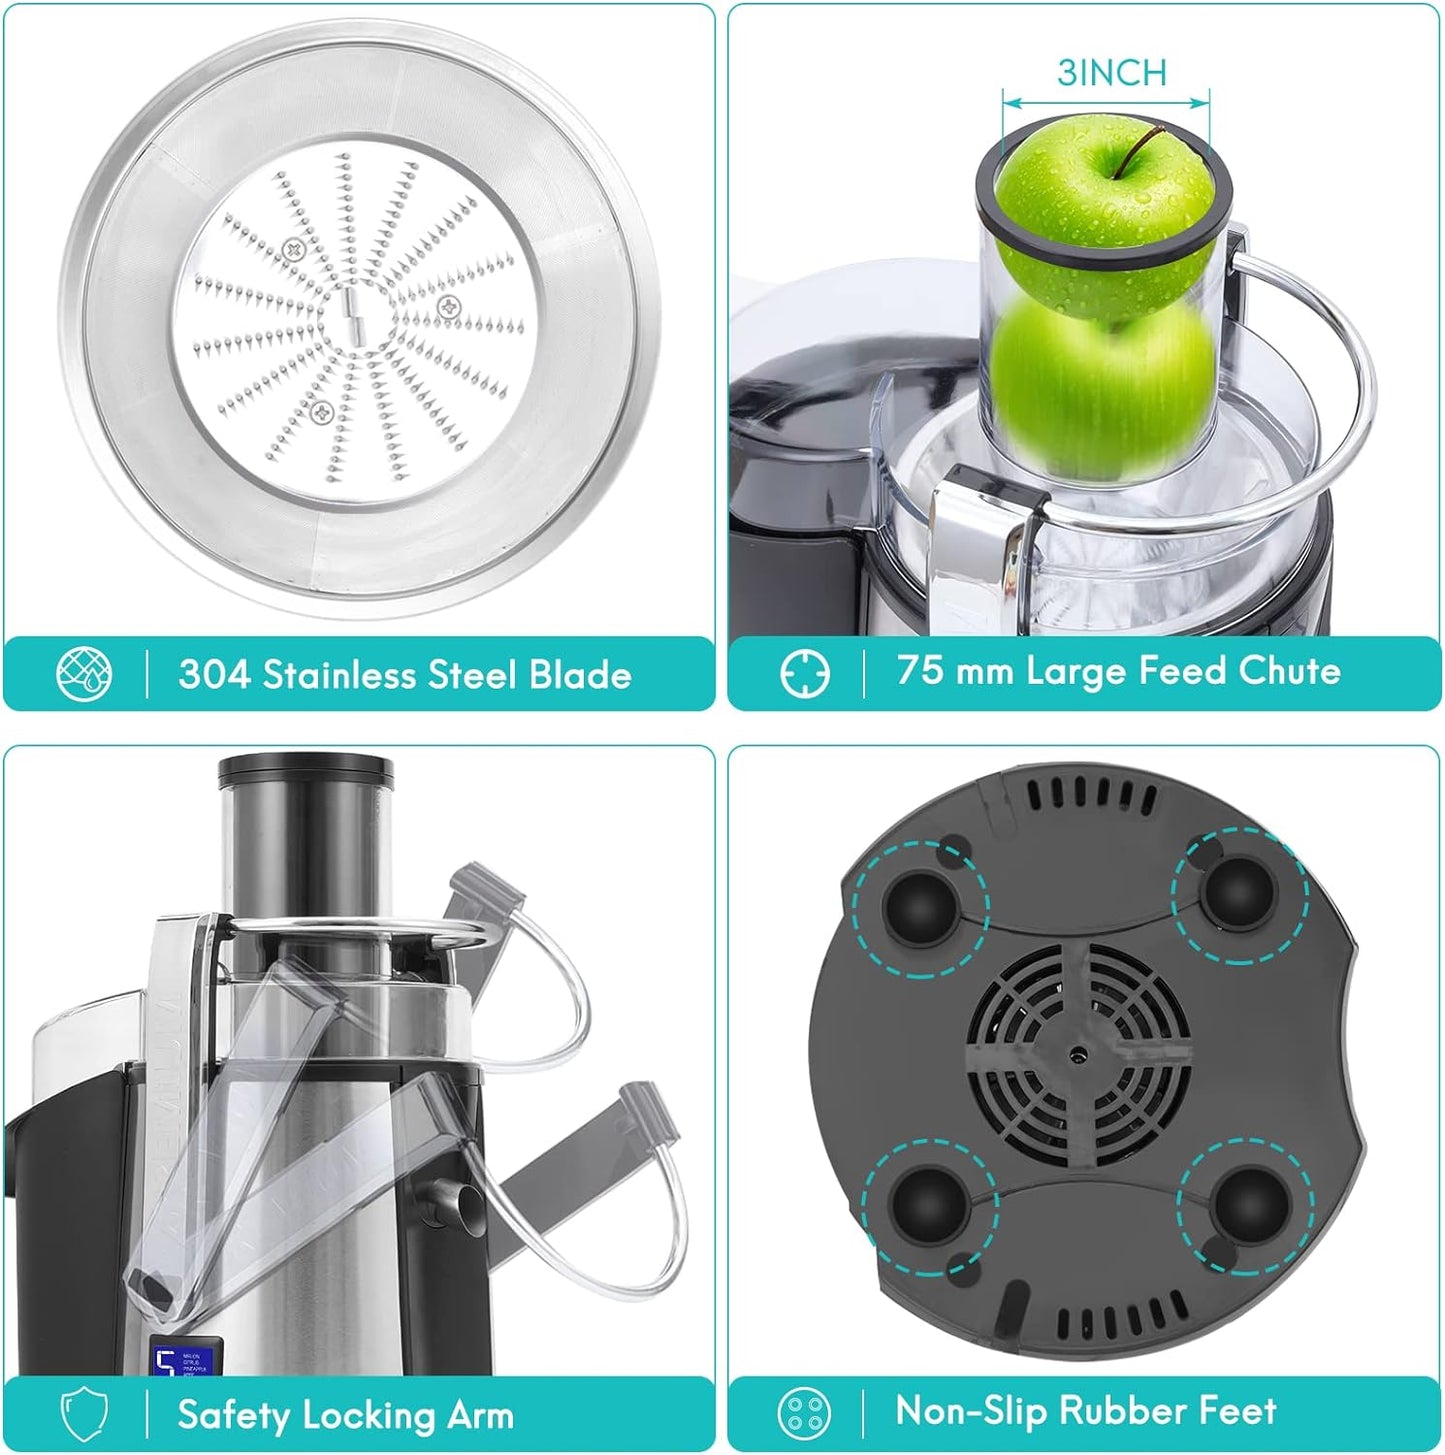 1000W 5-SPEED LCD Screen Centrifugal Juicer Machines Vegetable and Fruit, Healnitor Juice Extractor with Big Adjustable 3" Wide Chute, Easy Clean, BPA-Free, High Juice Yield, Silver